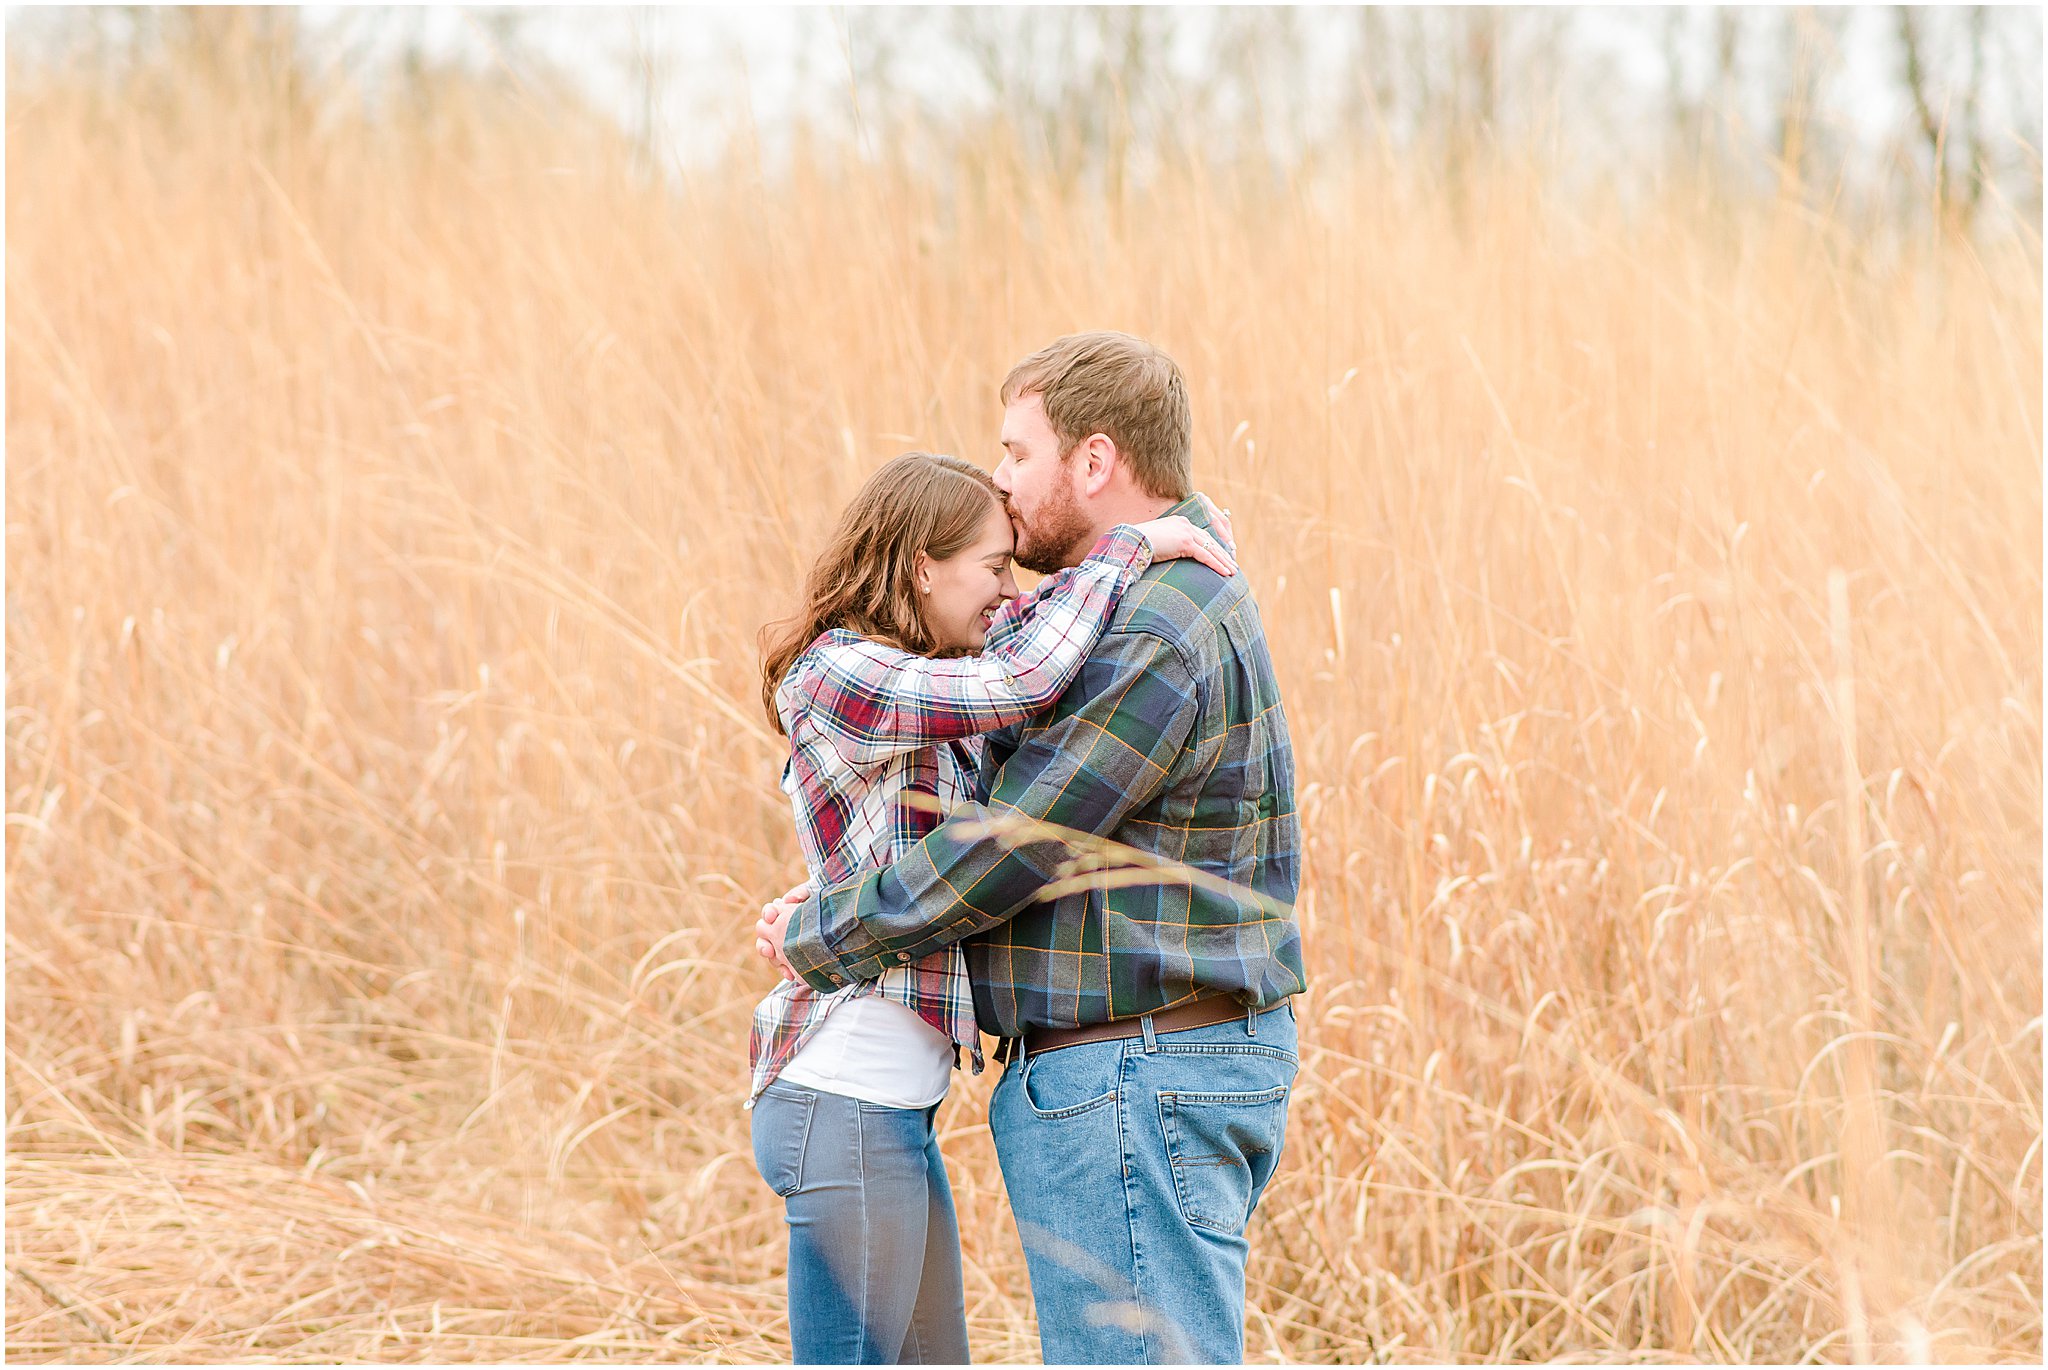 Guy kissing girl's forehead during Eagle Creek Park engagement session